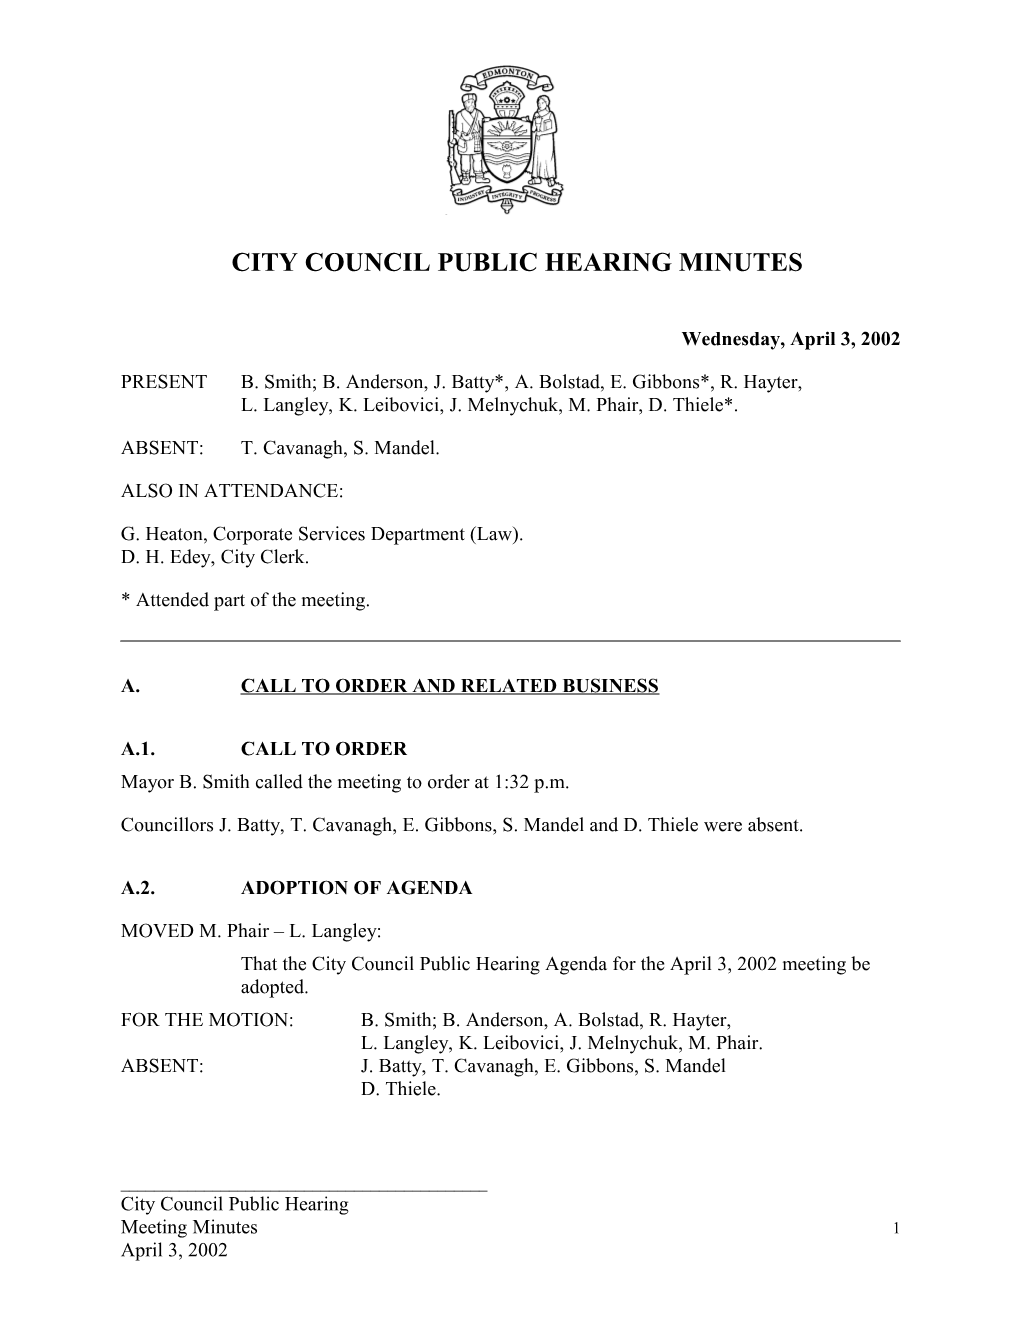 Minutes for City Council April 3, 2002 Meeting